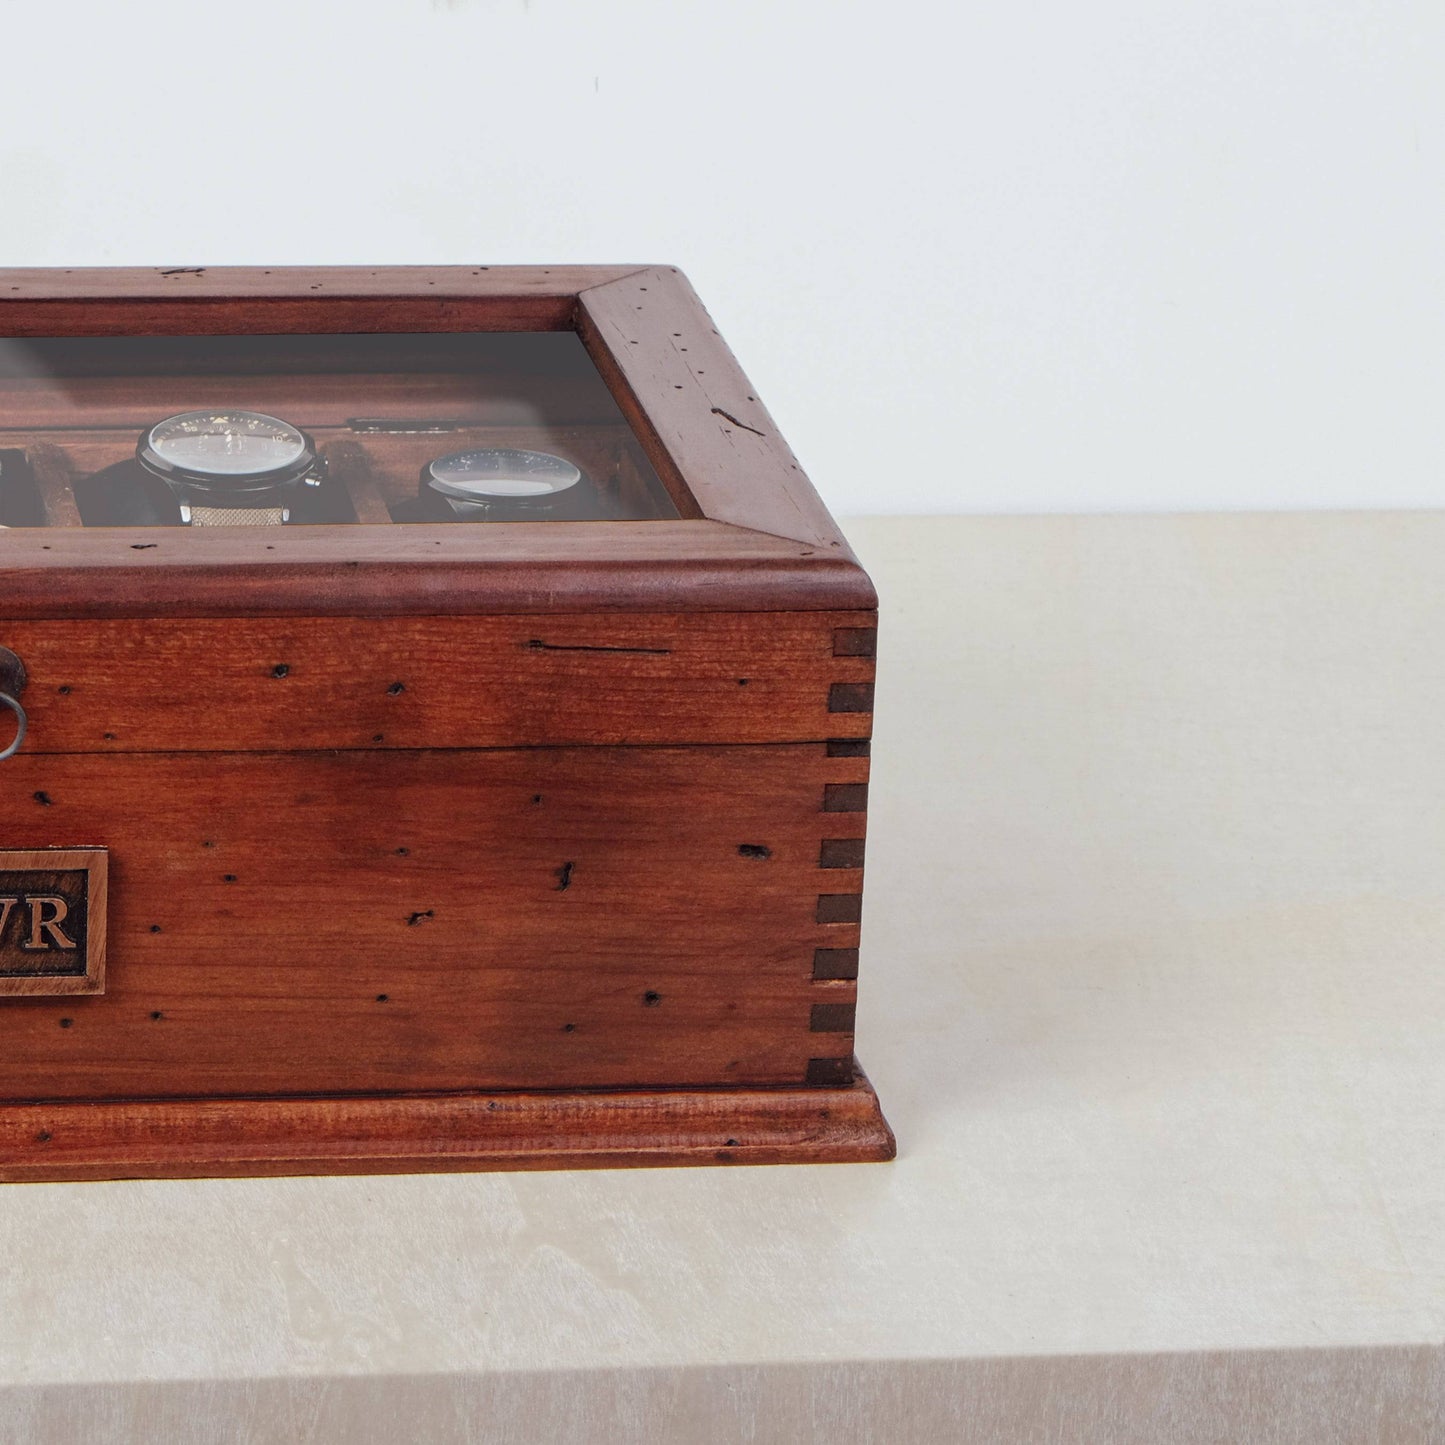 Watch Box for 10 Watches with a Secret Compartment. - Deferichs